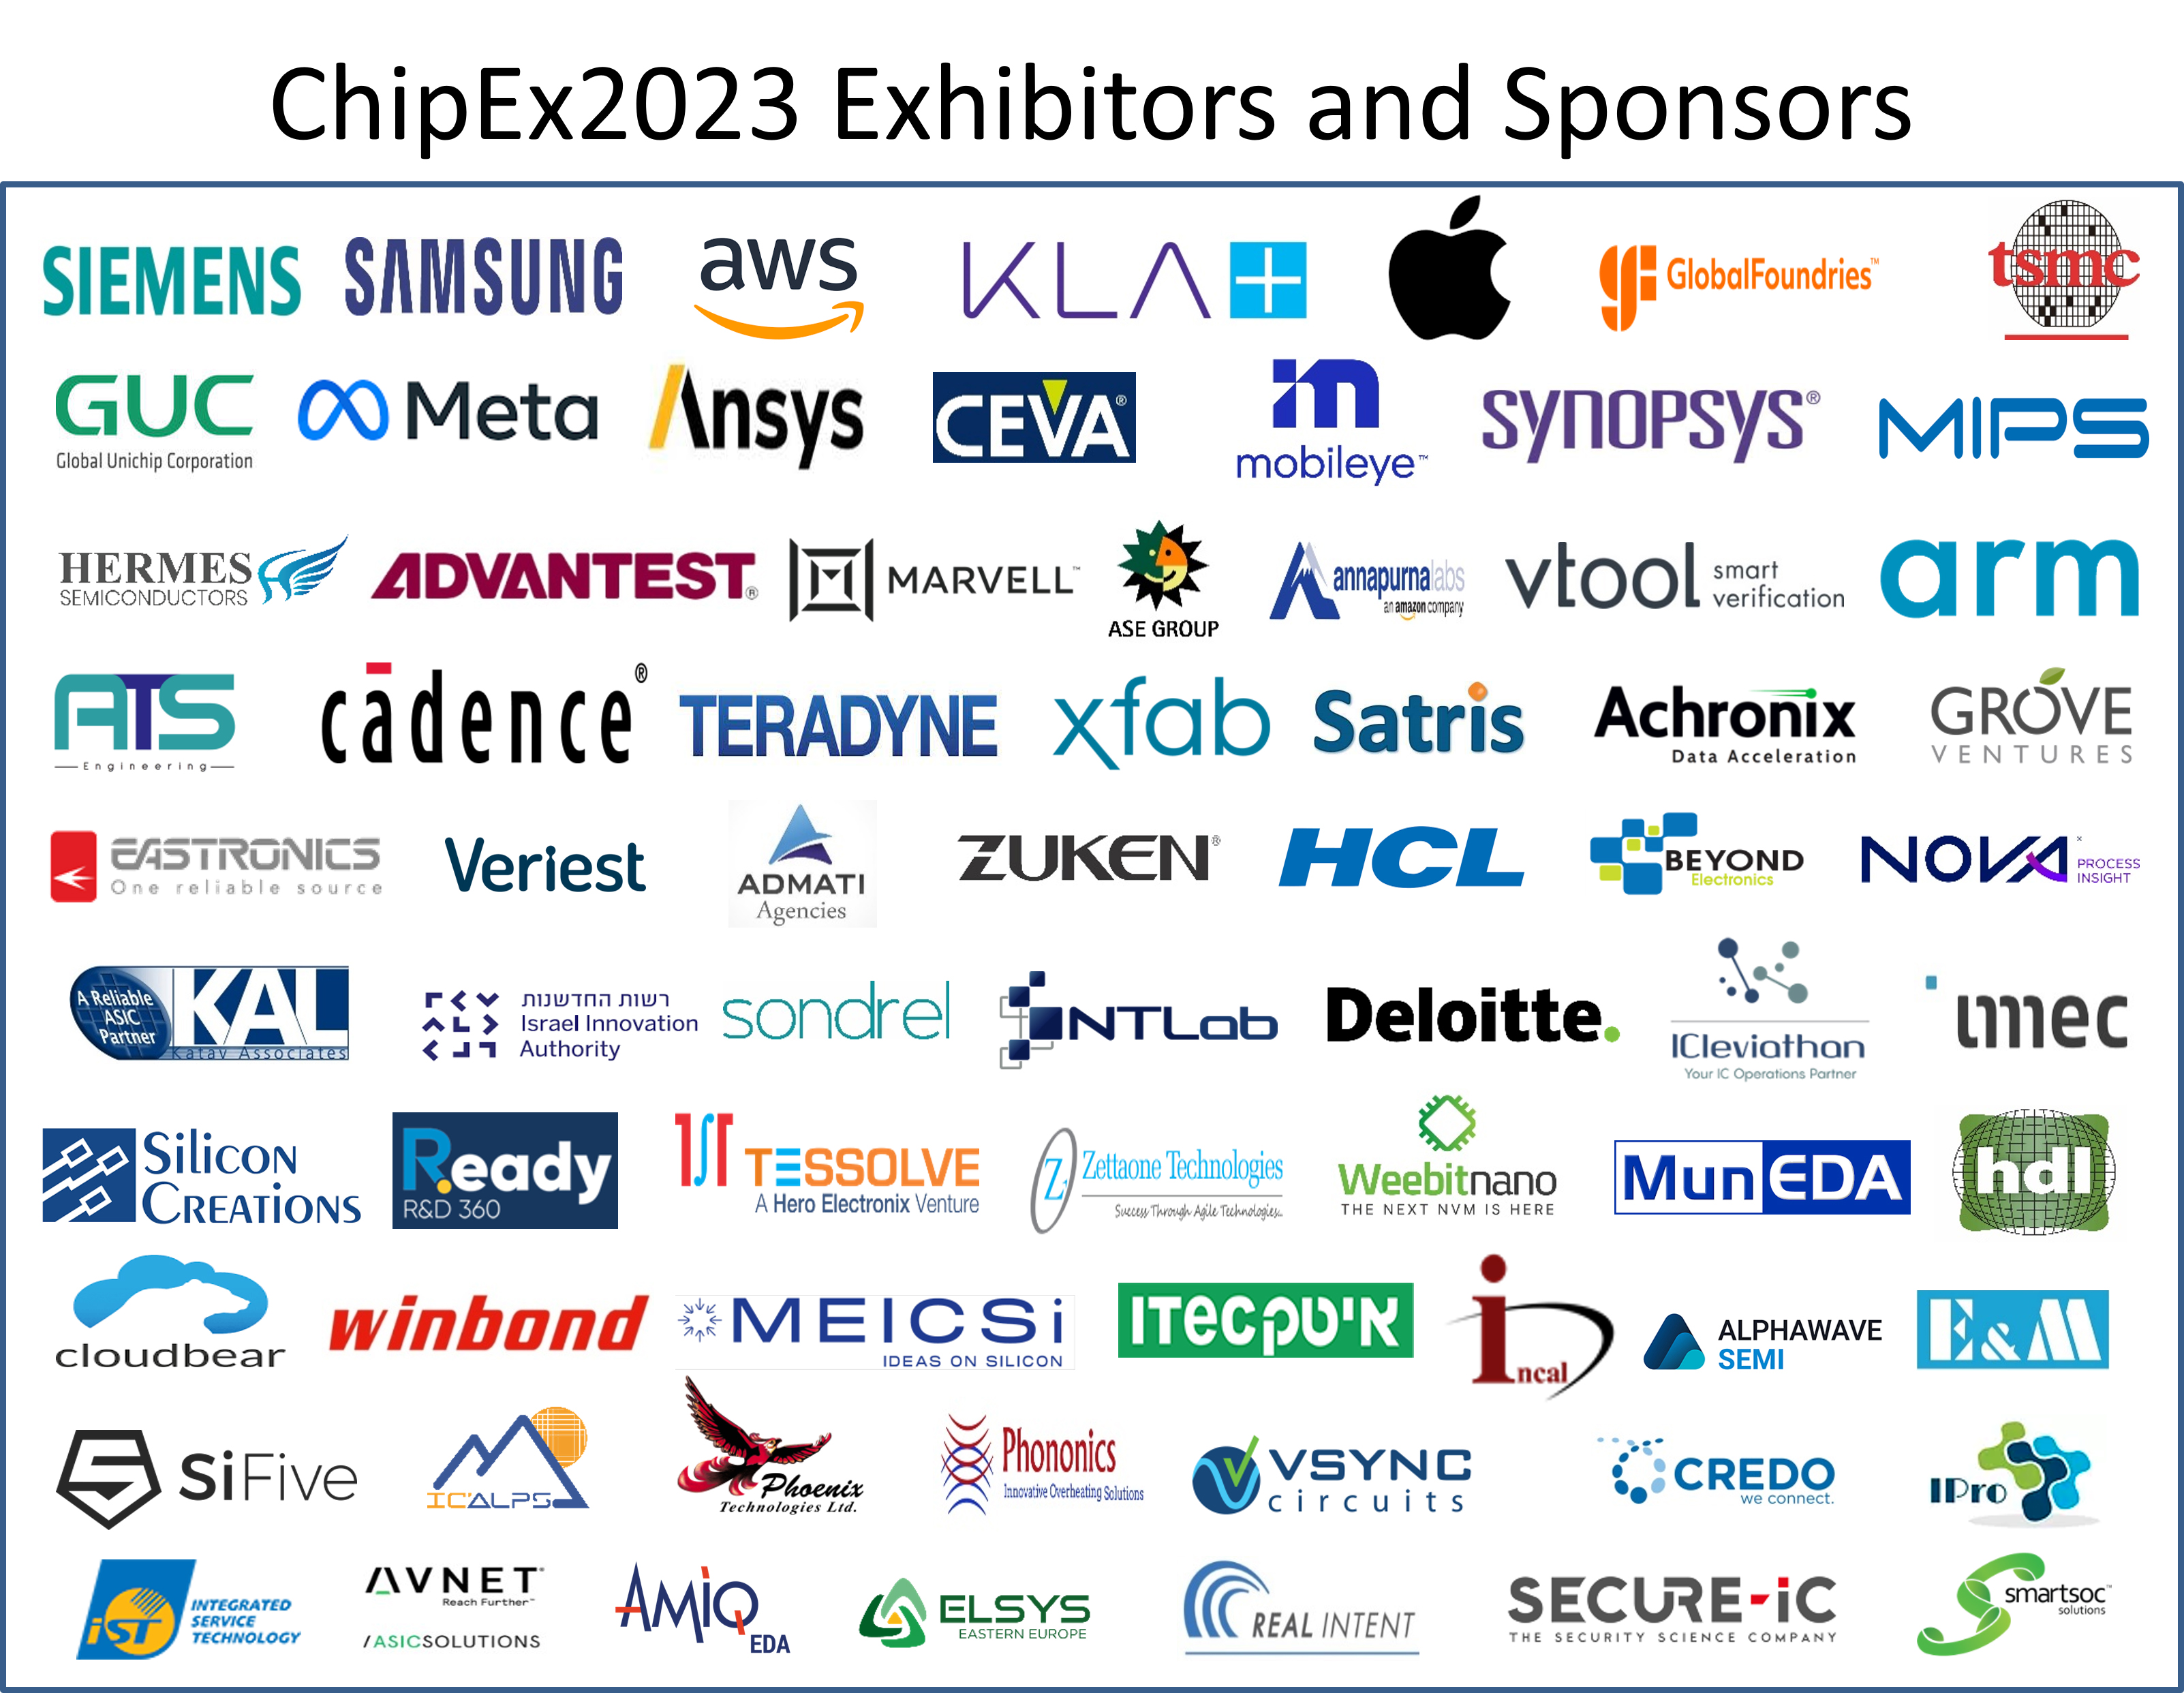 ChipEx2023 Exhibitors and sponsors